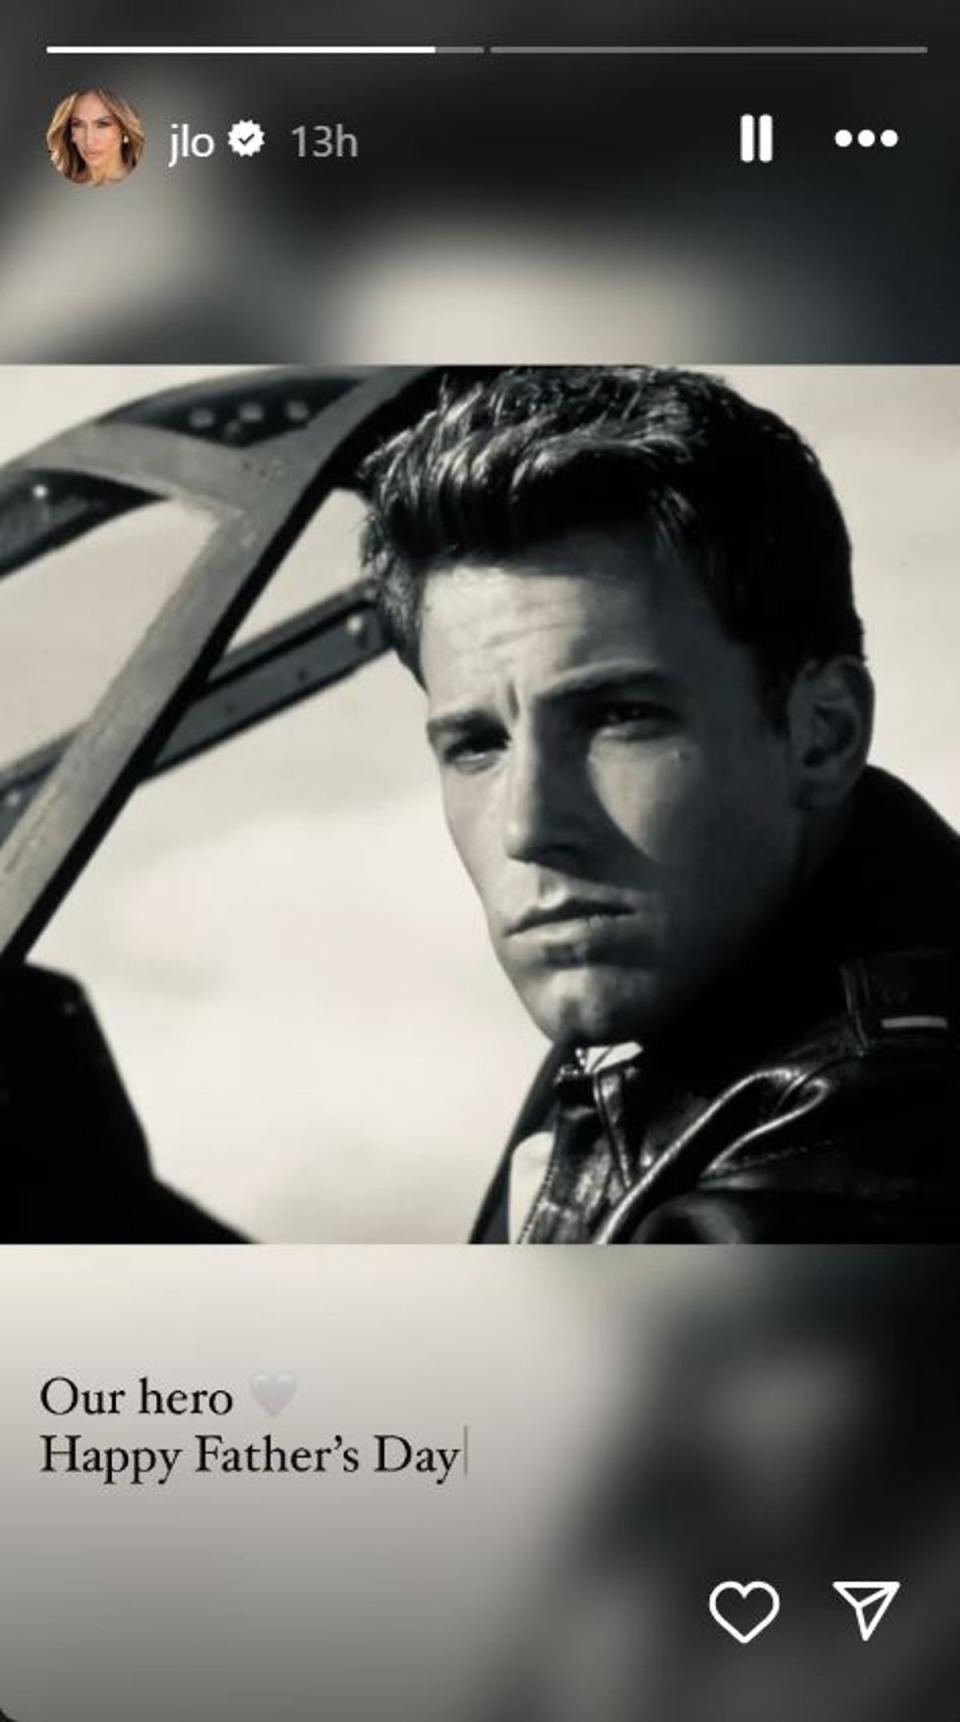 J-Lo shared a picture of Ben Affleck from the film Pearl Harbour where he first met ex-wife Jennifer Garner (Instagram @jlo)